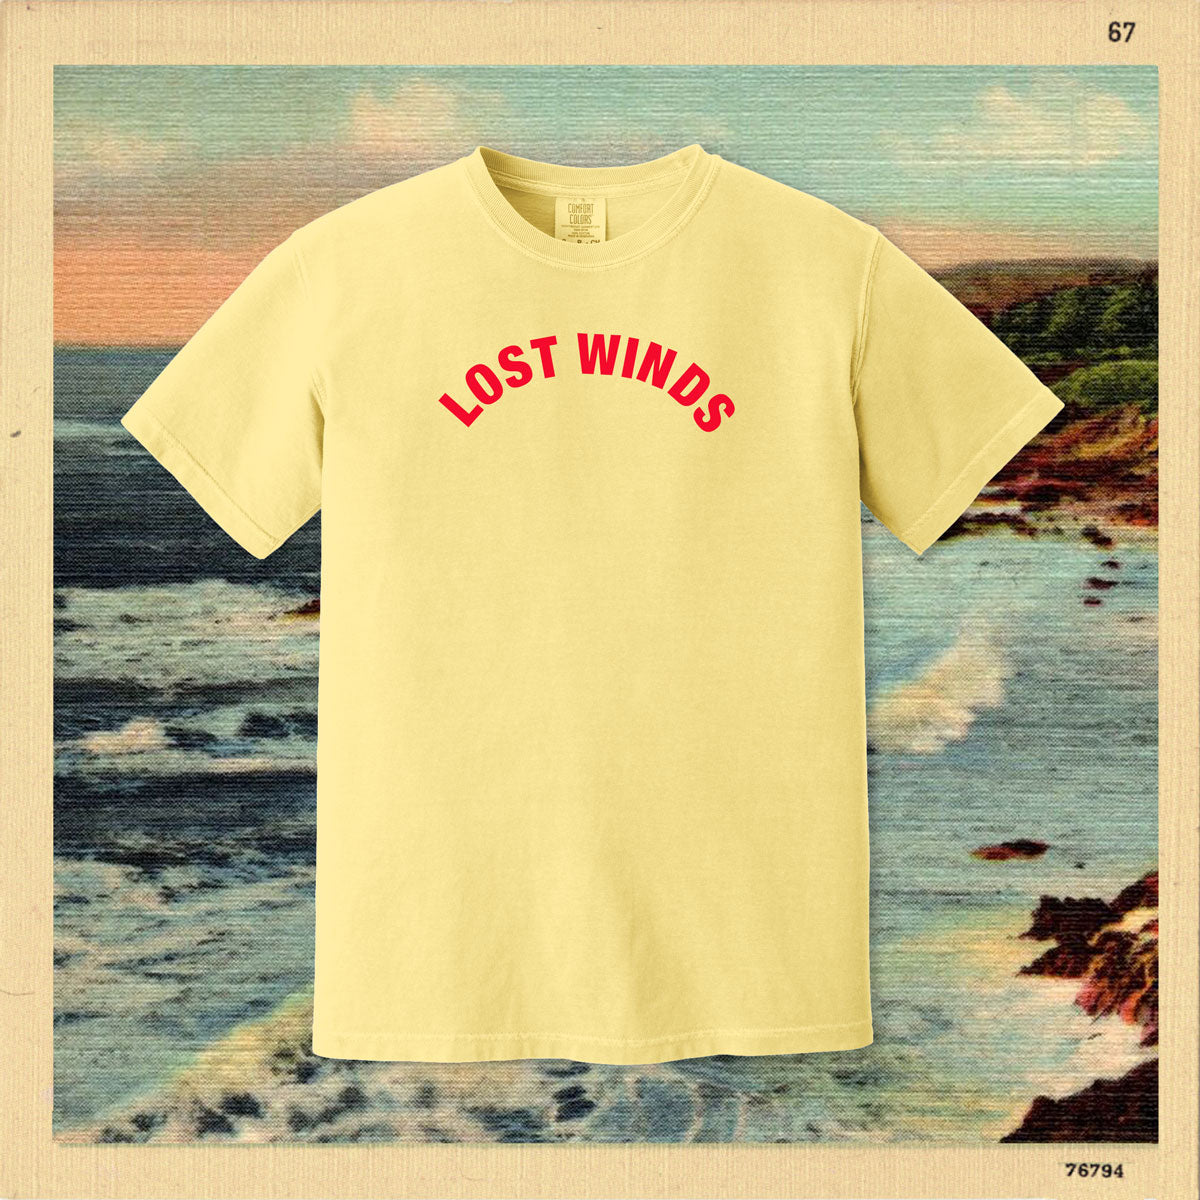 Lost Winds Short Sleeve T-Shirt